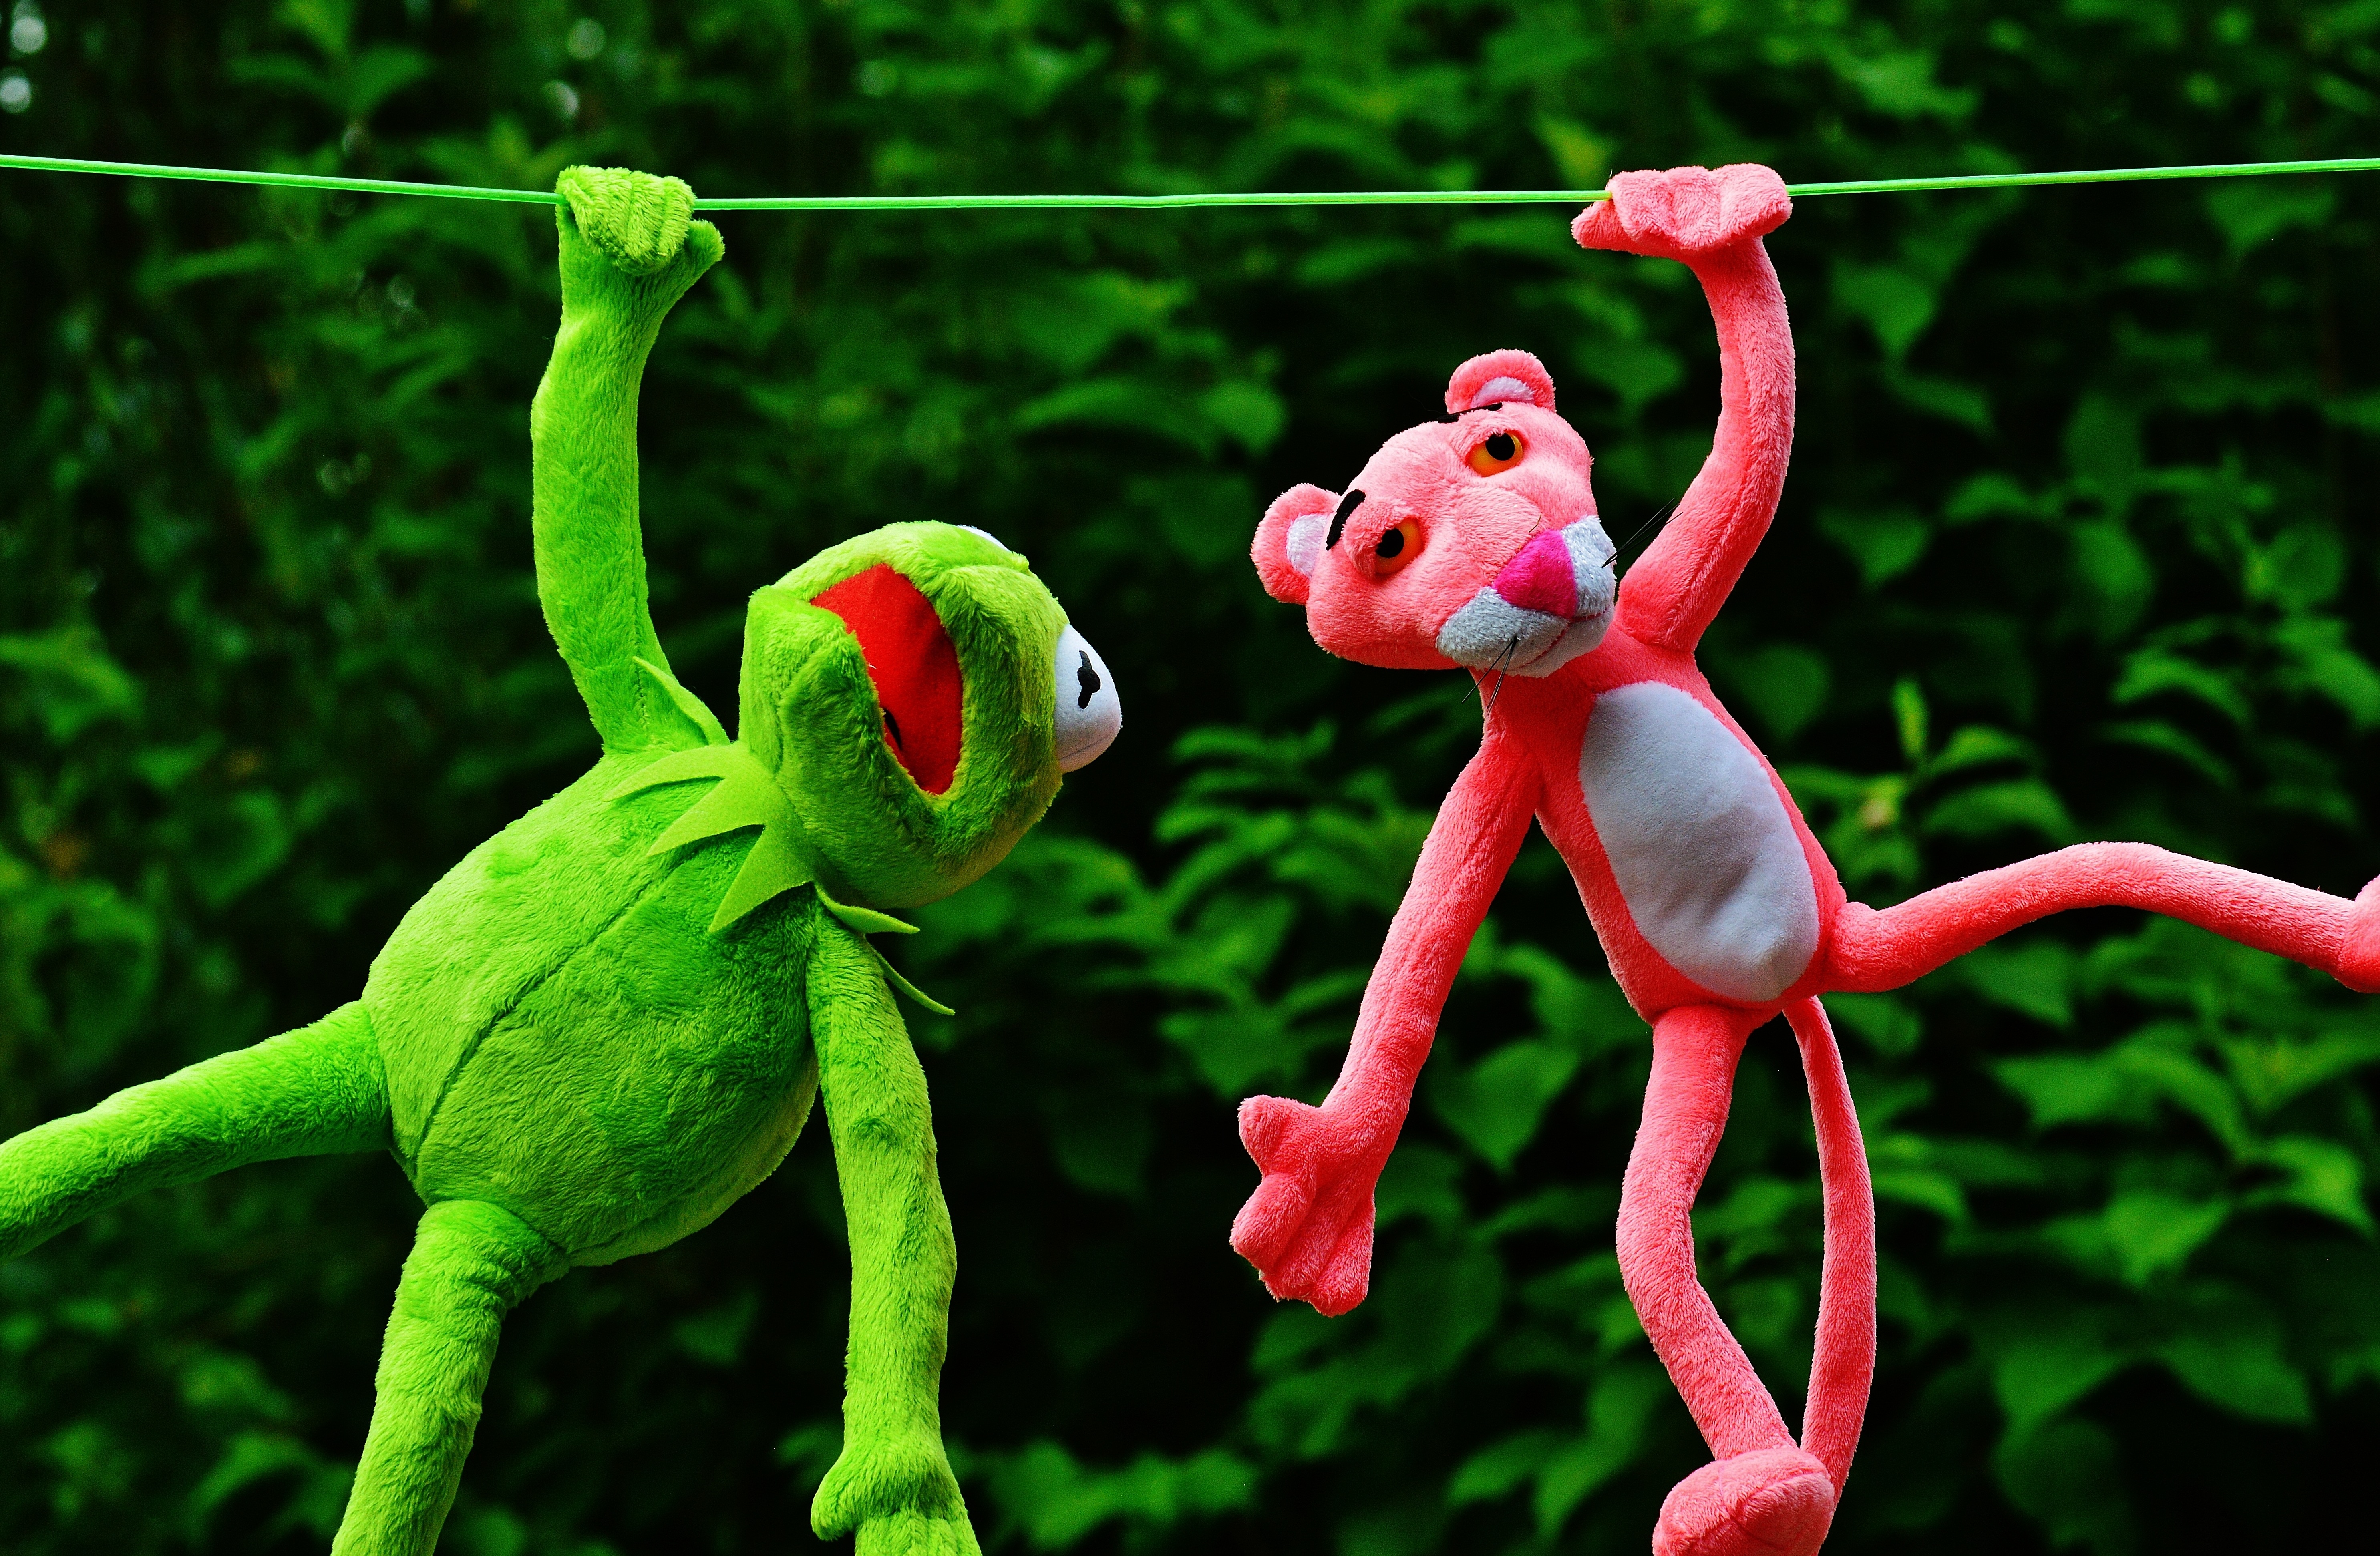 kermit the frog and pink panther plush toys